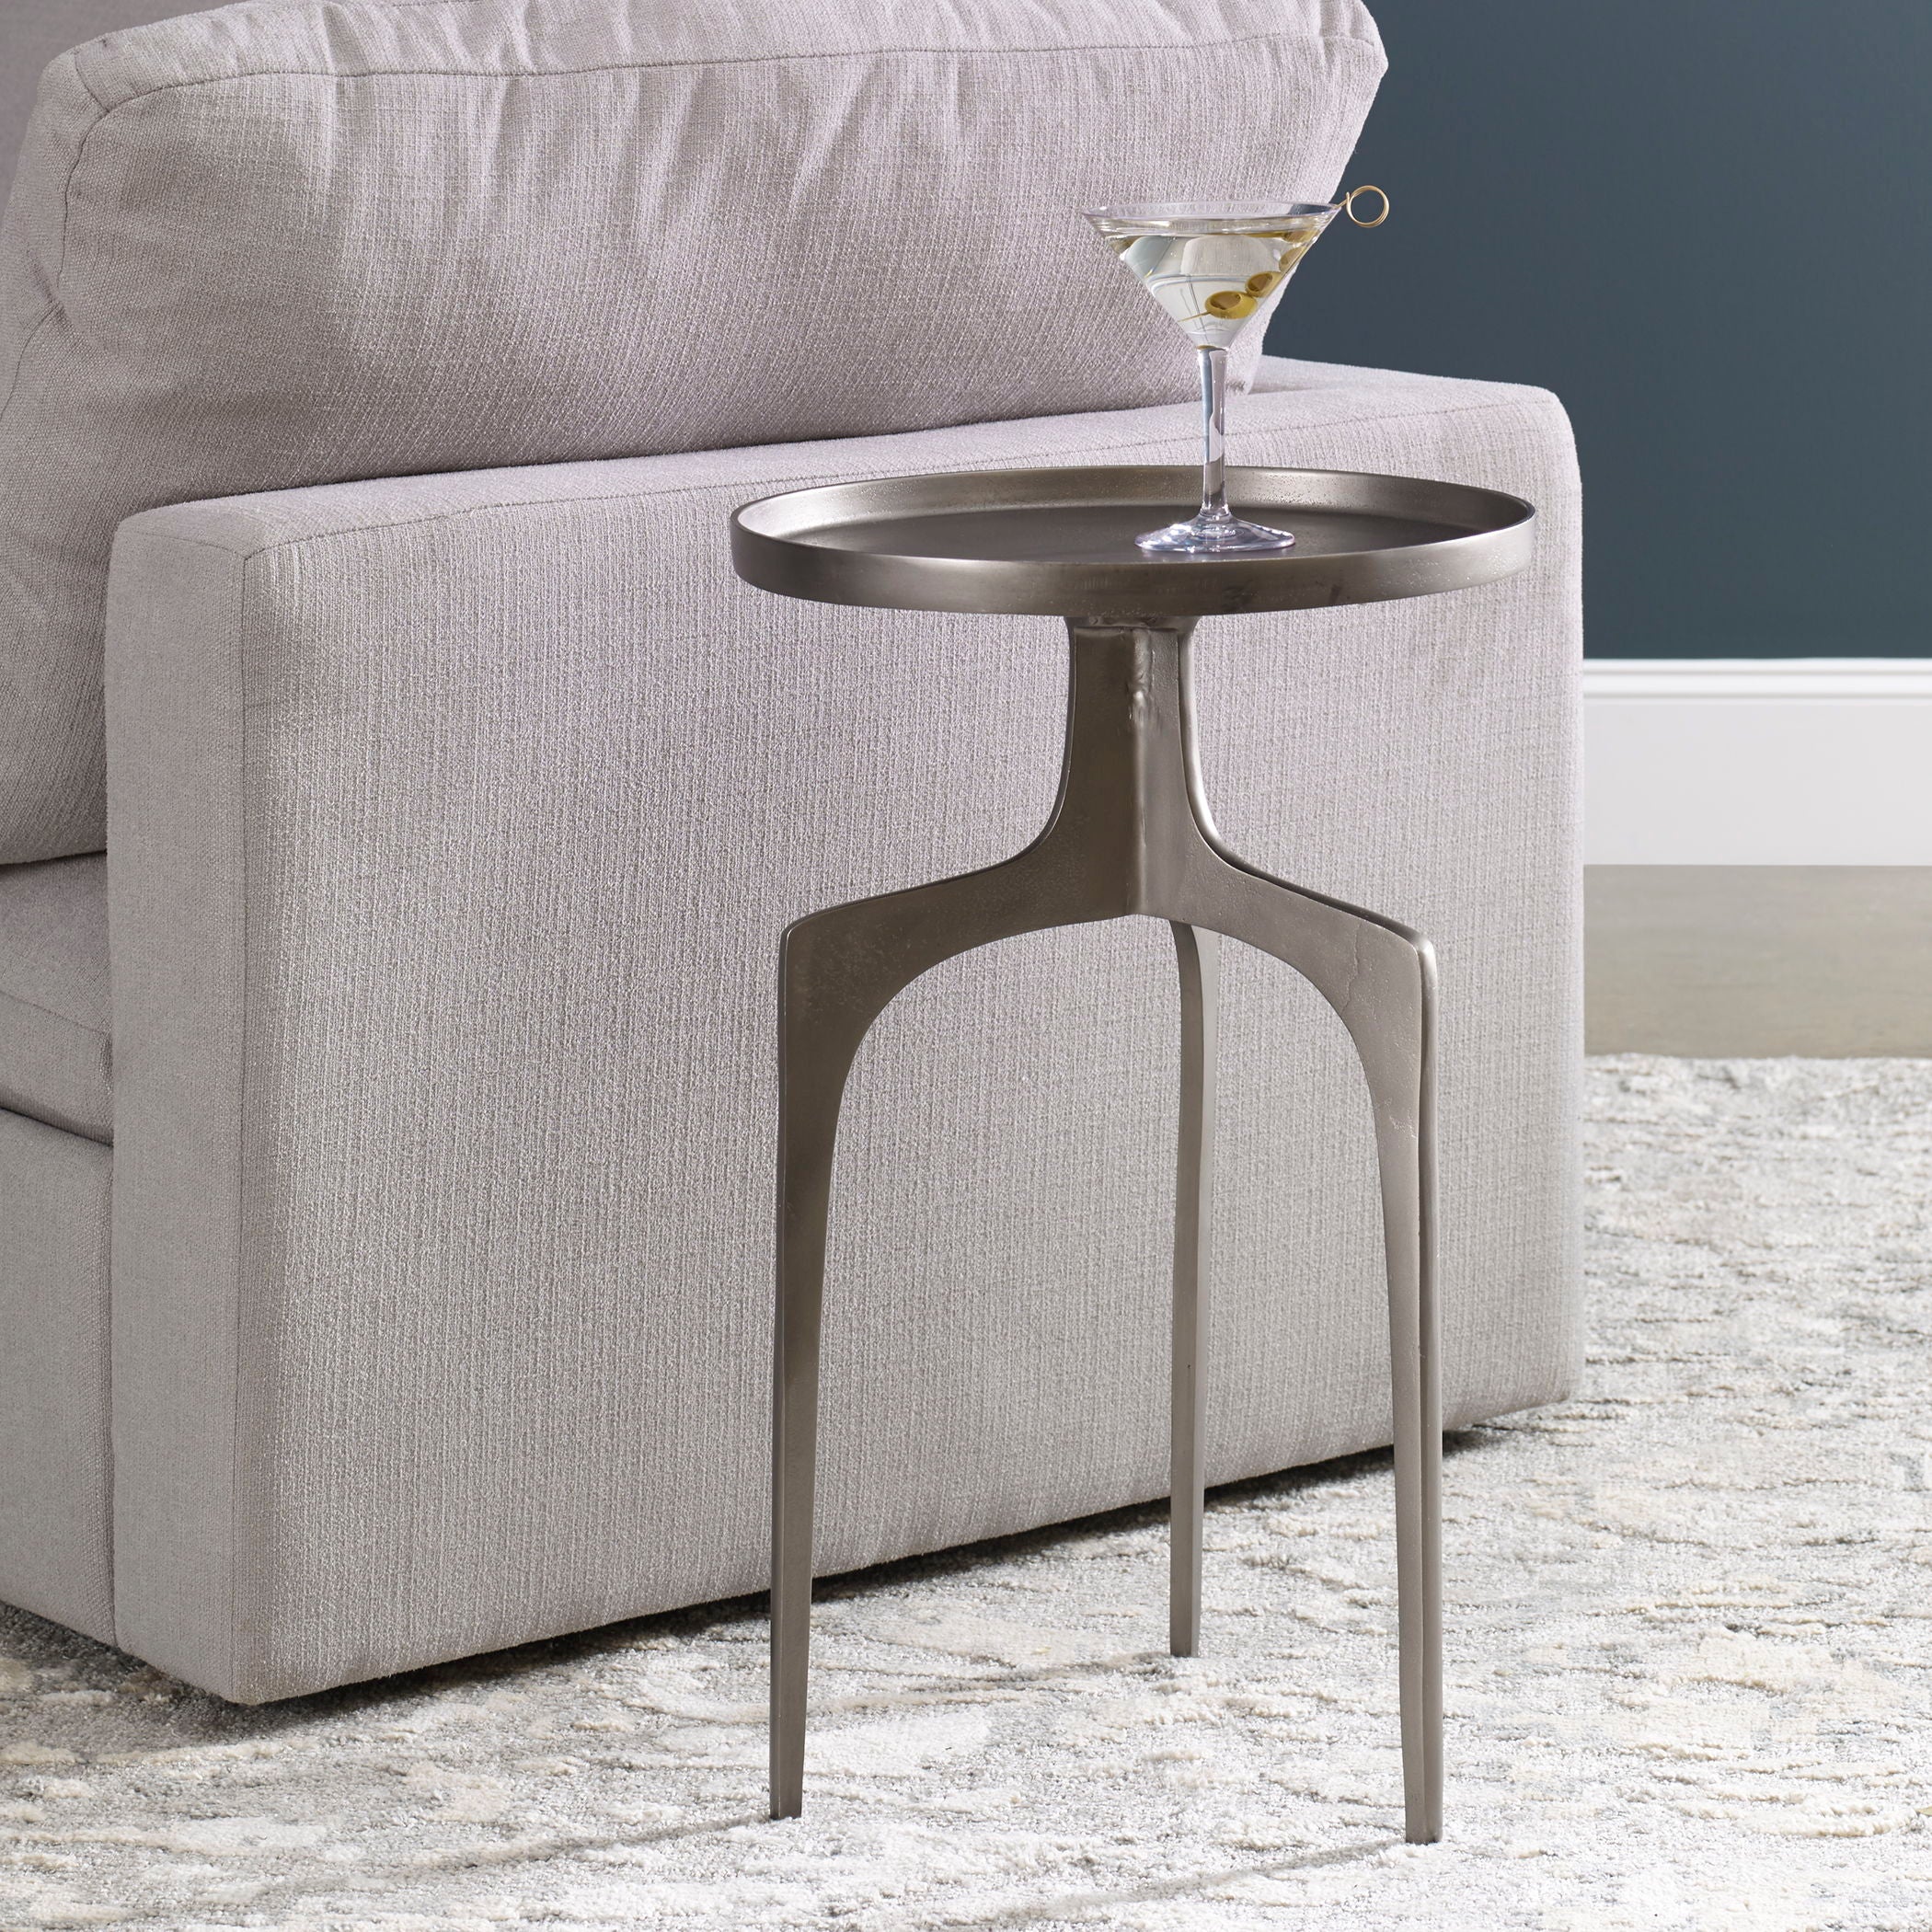 Kenna - Accent Table - Nickel